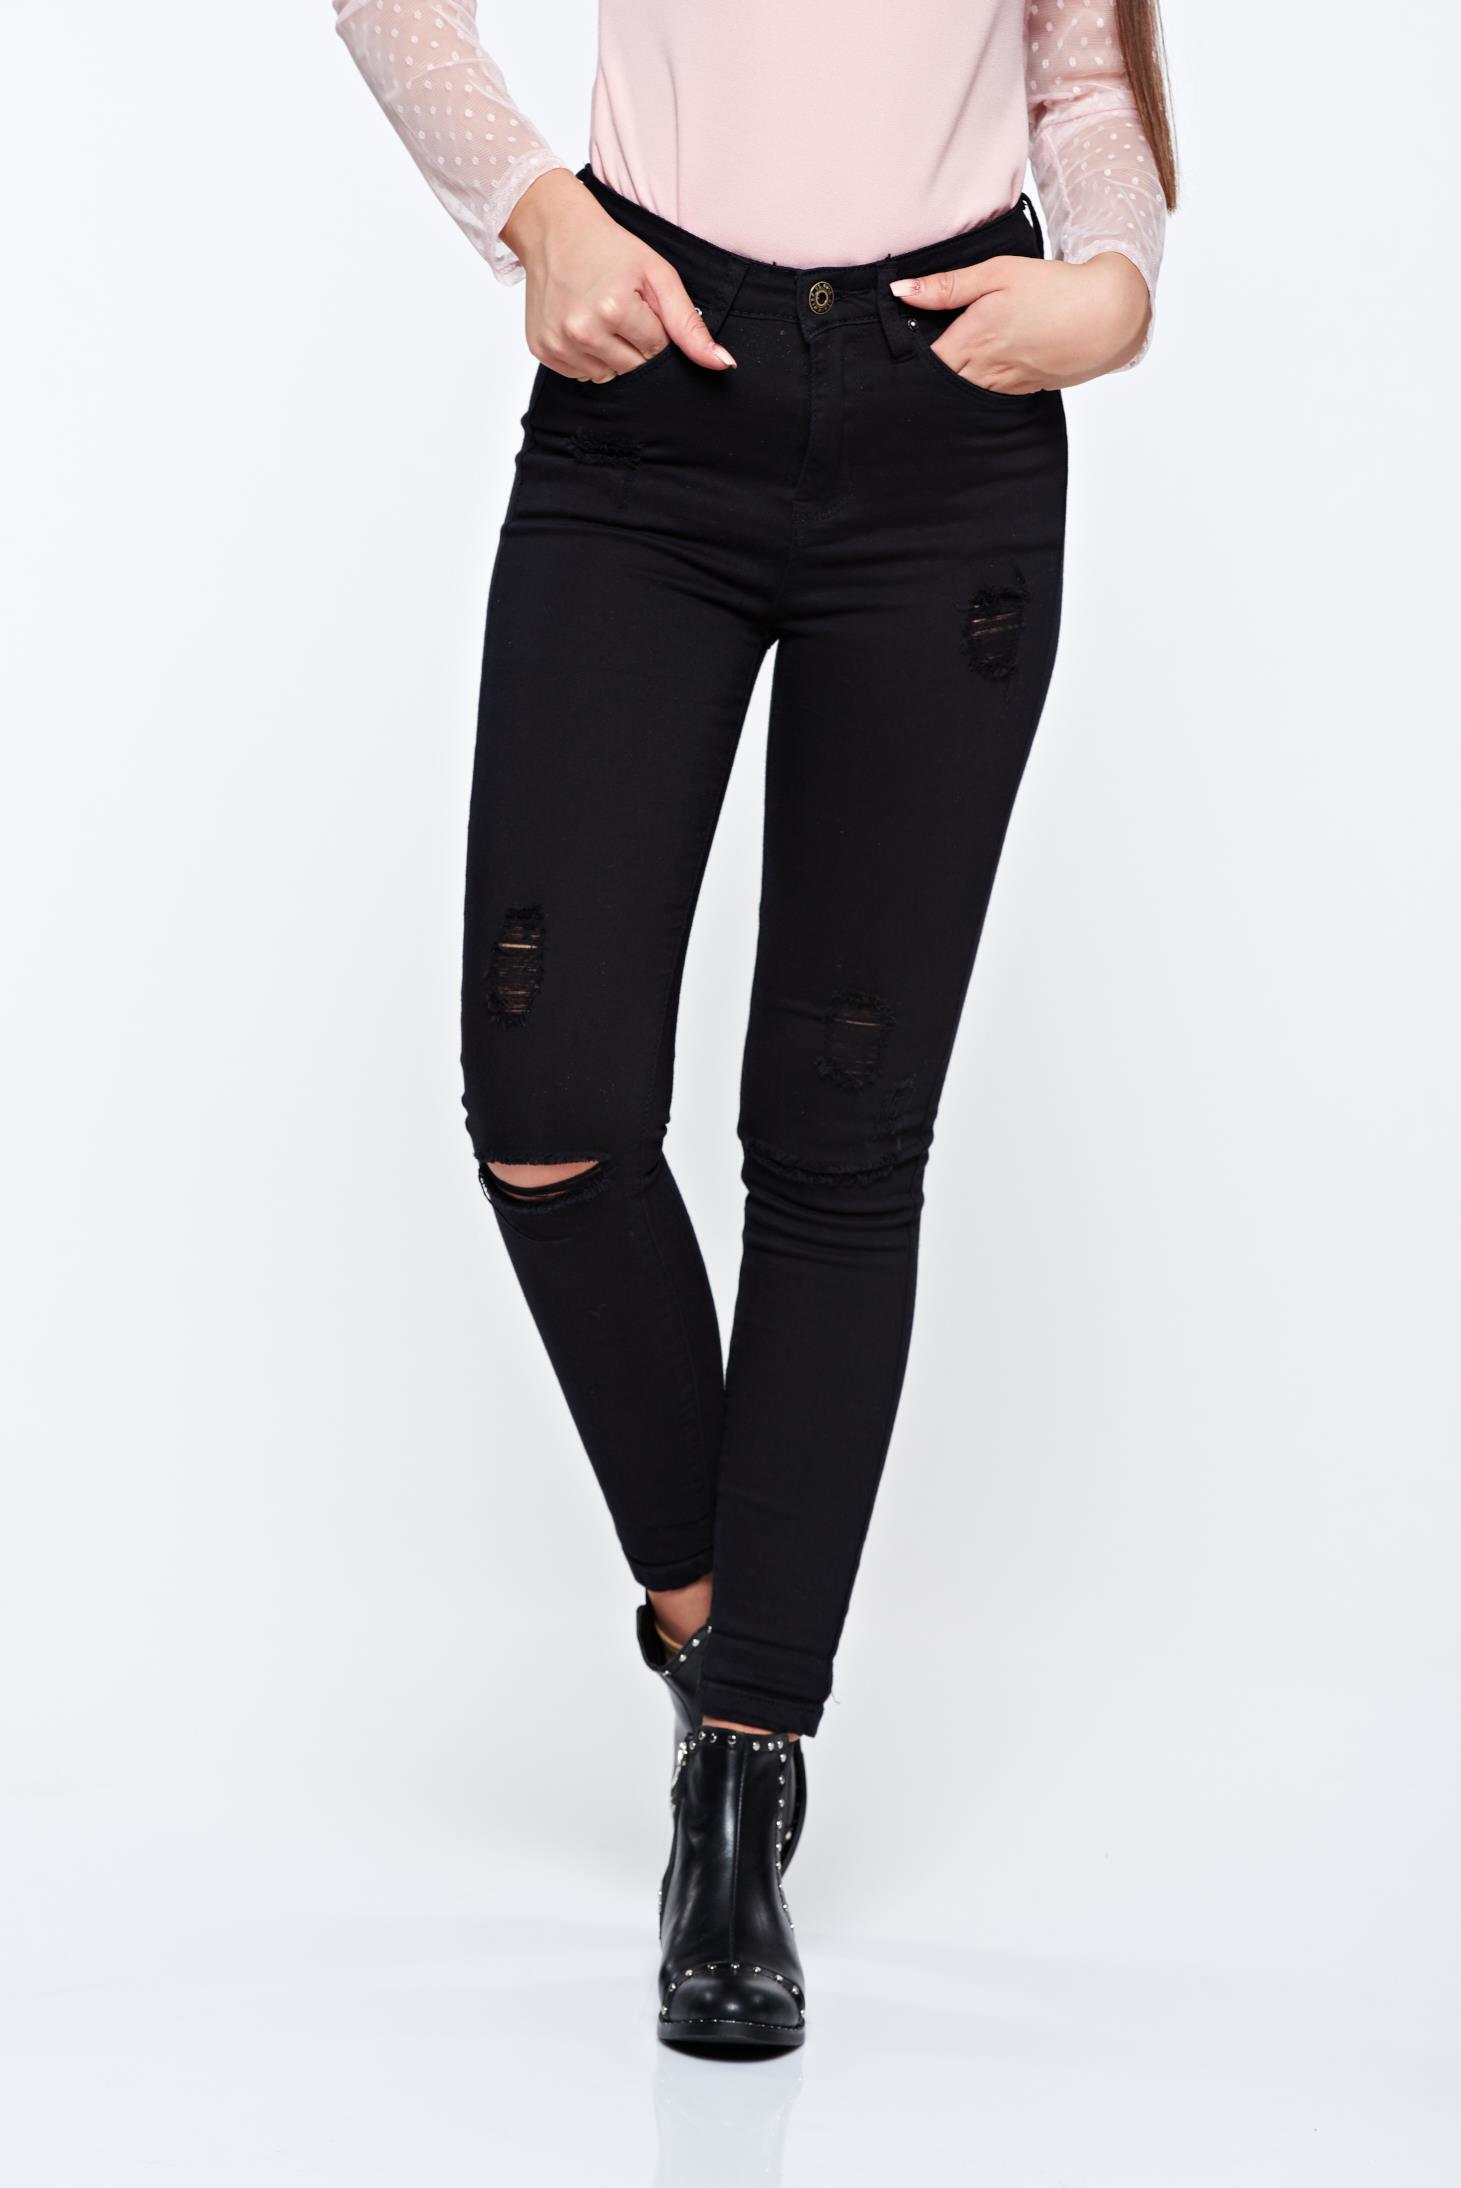 Black jeans casual skinny jeans cotton with ruptures 1 - StarShinerS.com